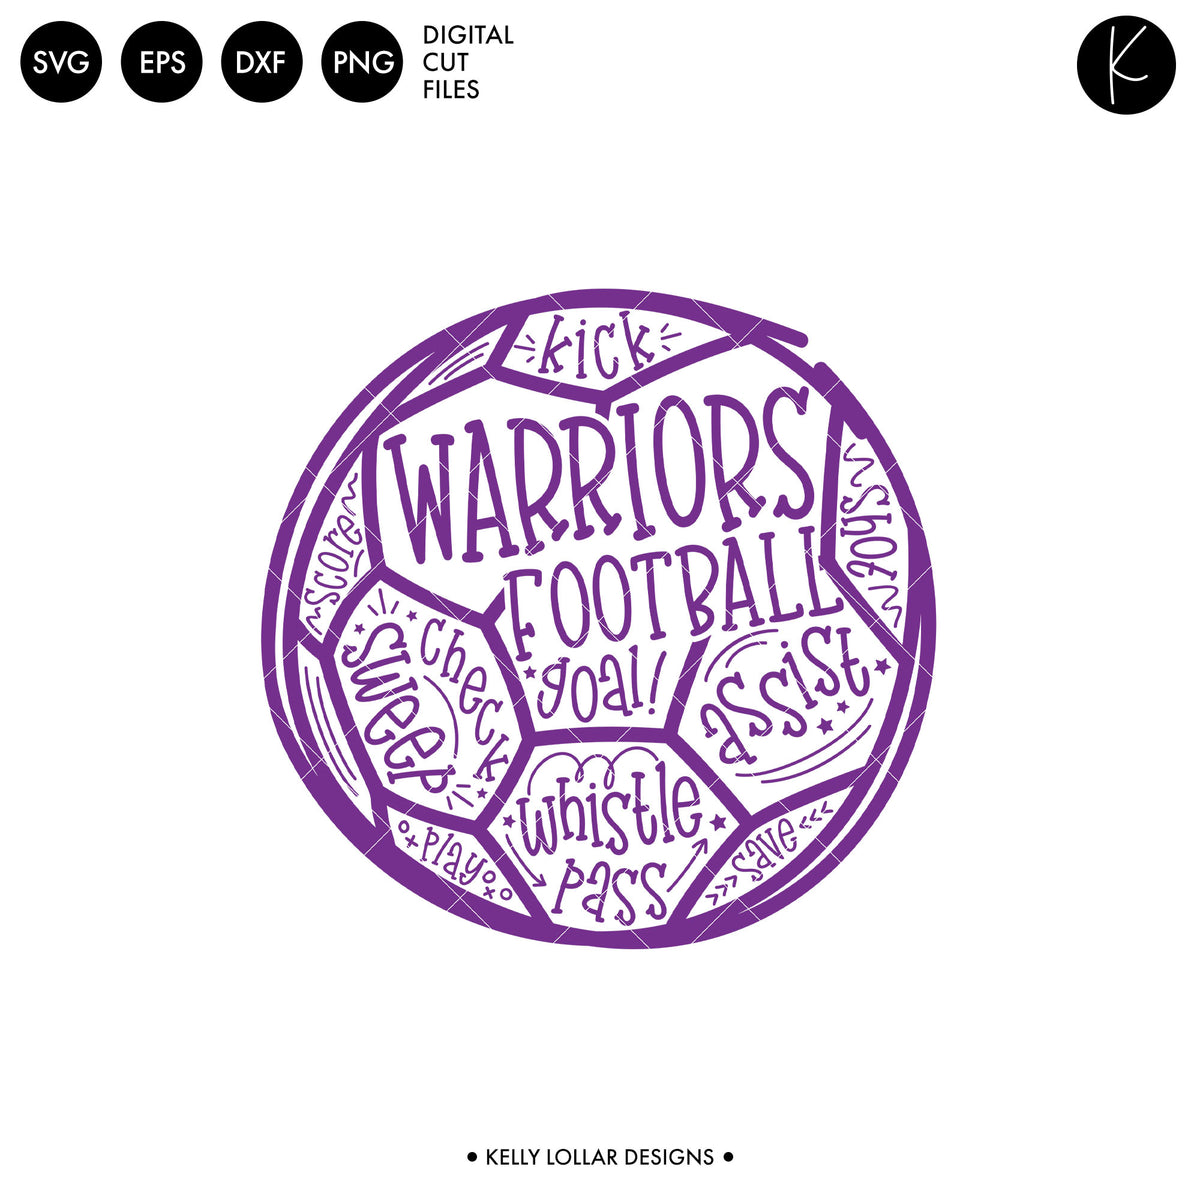 Warriors Soccer and Football Bundle | SVG DXF EPS PNG Cut Files